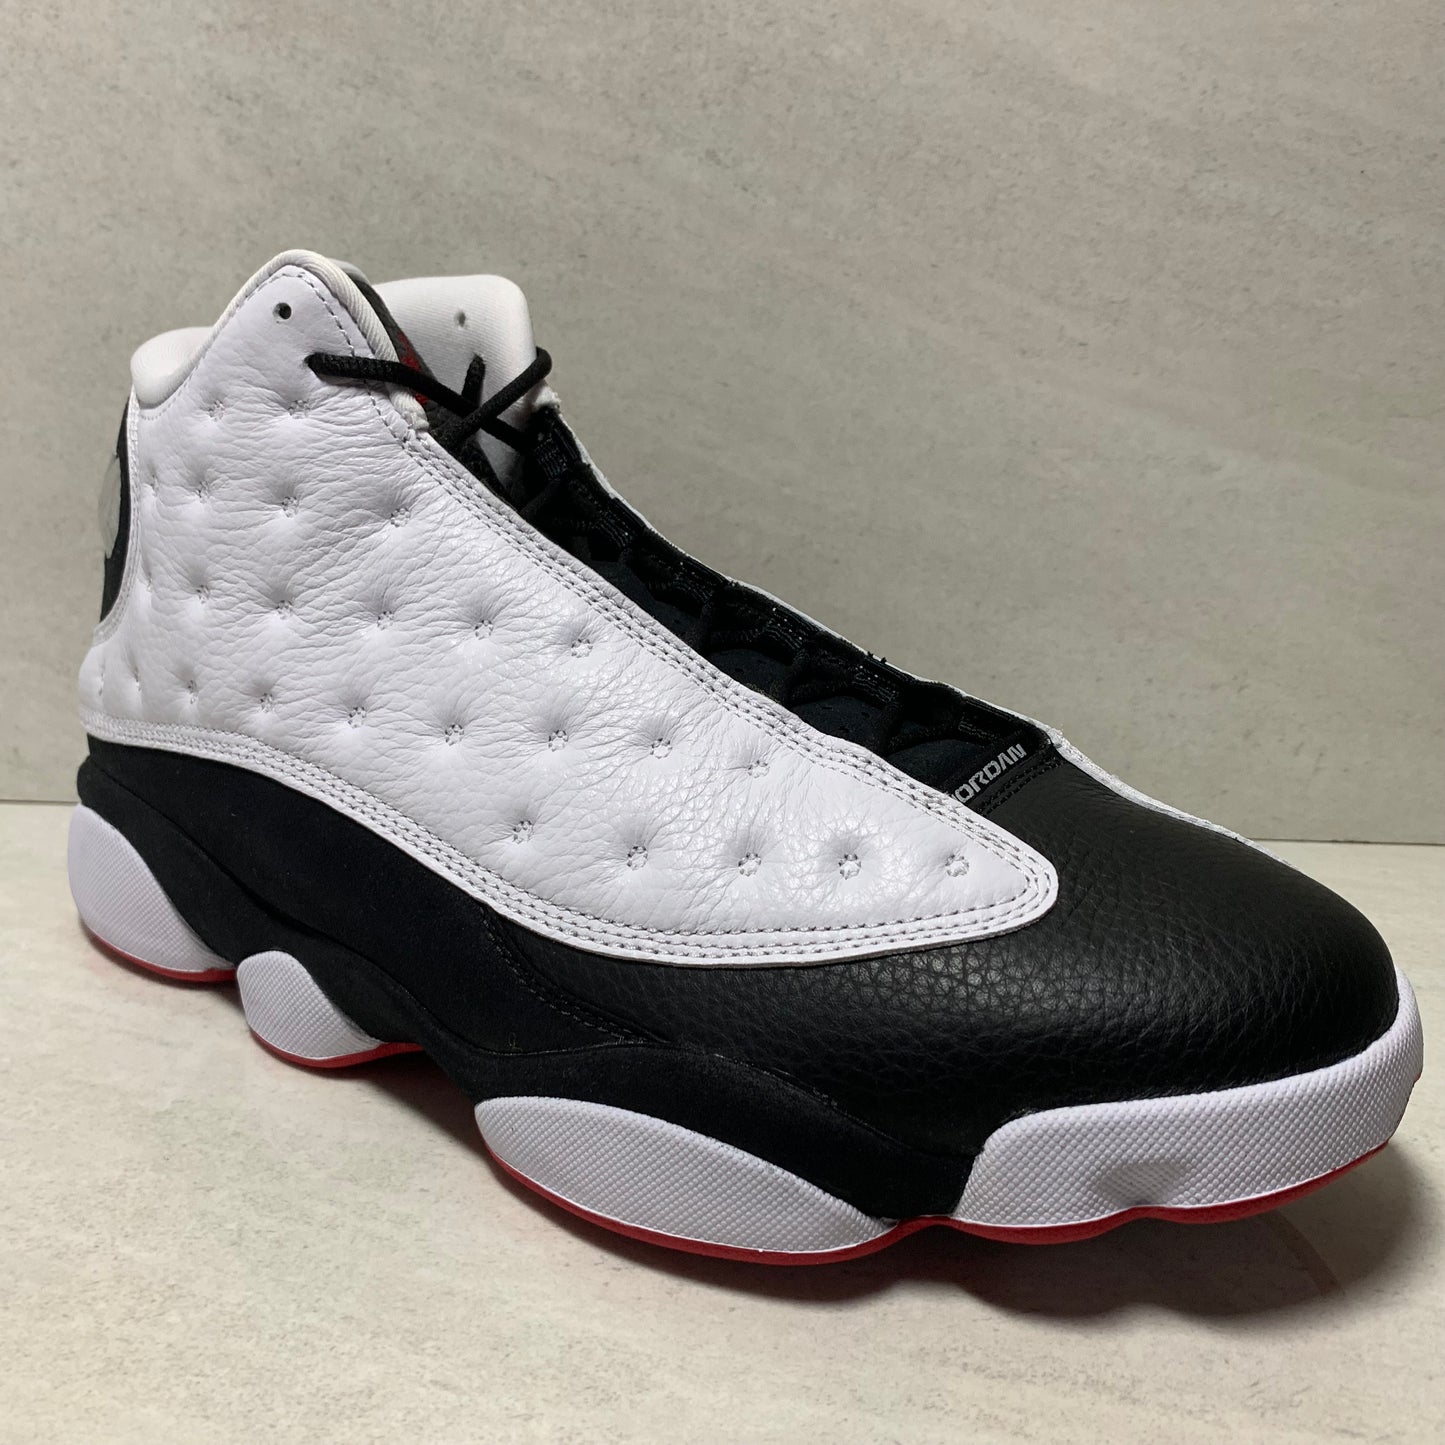 NIKE AIR JORDAN 13 XIII RETRO HE GOT GAME 414571-104 TAILLE 7.5/TAILLE 12.5/TAILLE 16